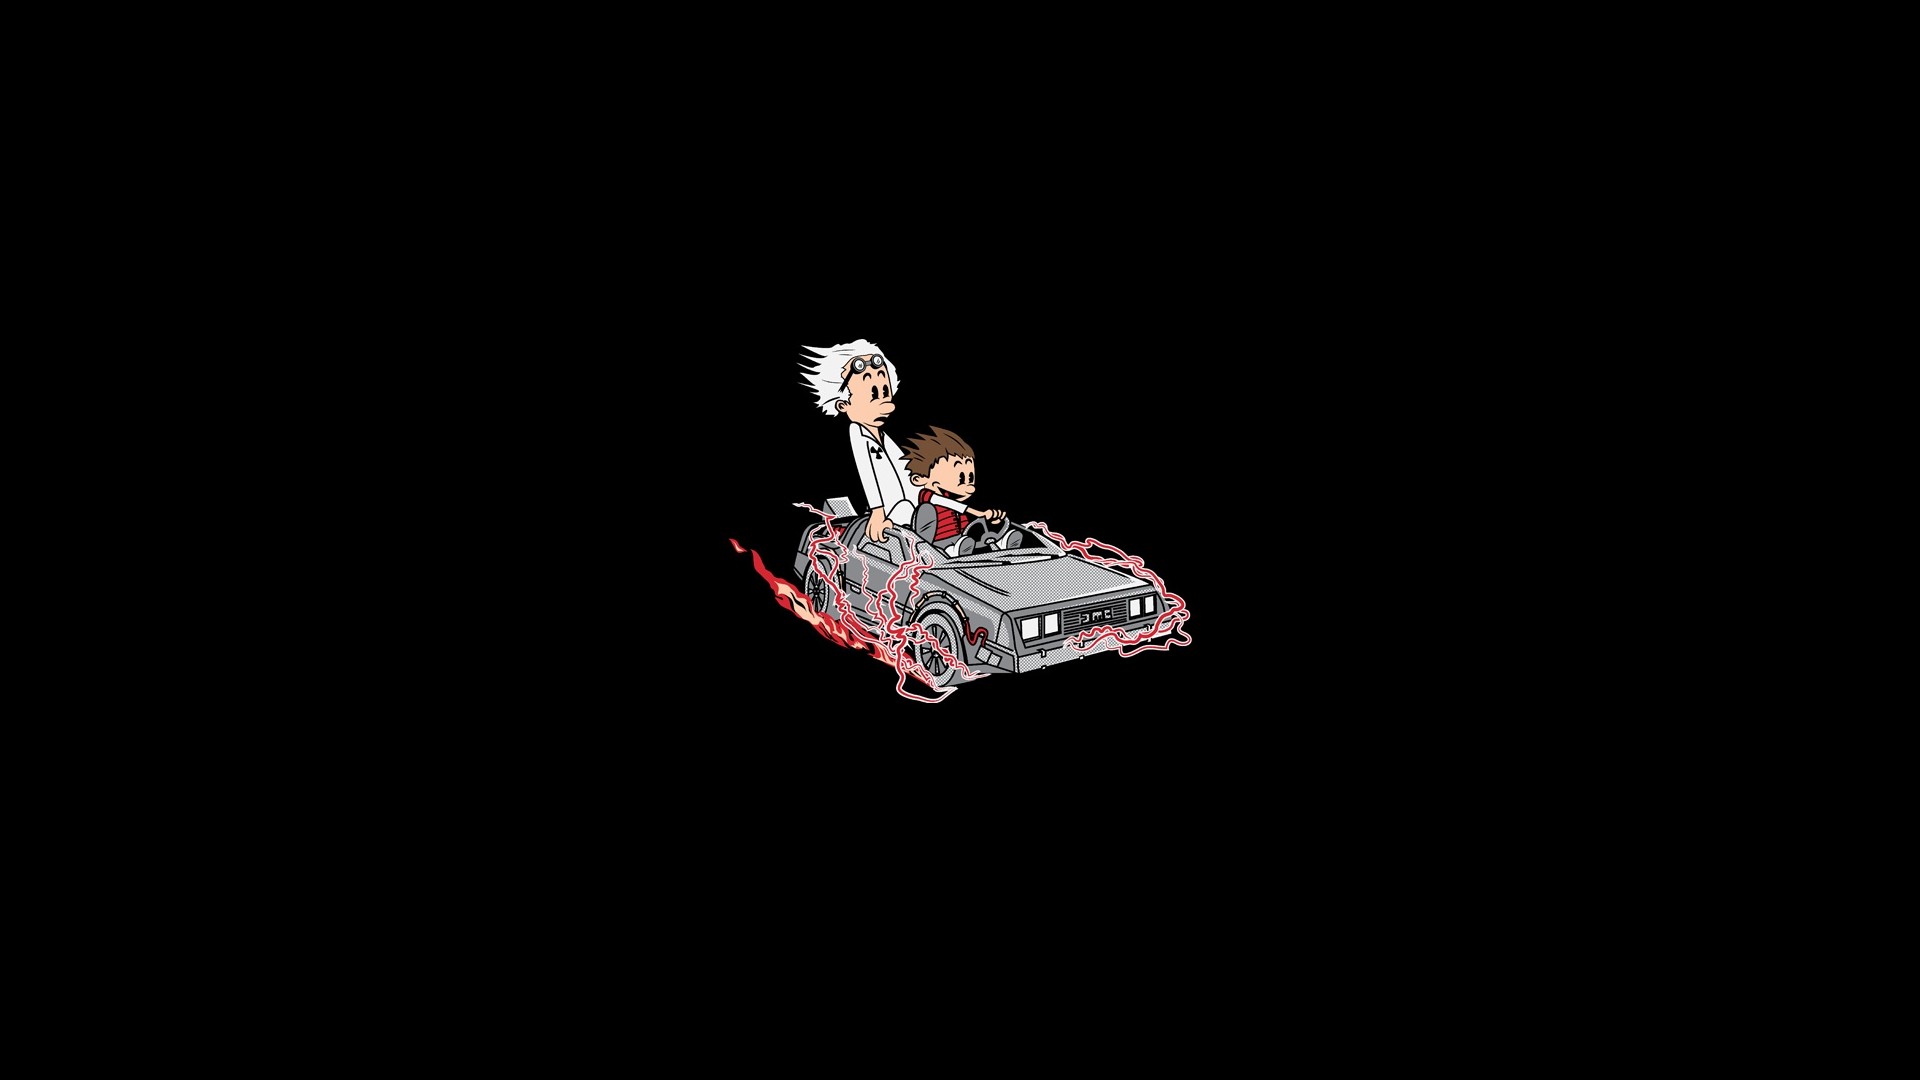 Calvin Calvin Amp Hobbes Calvin Amp Hobbes Back To The Future 1920x1080